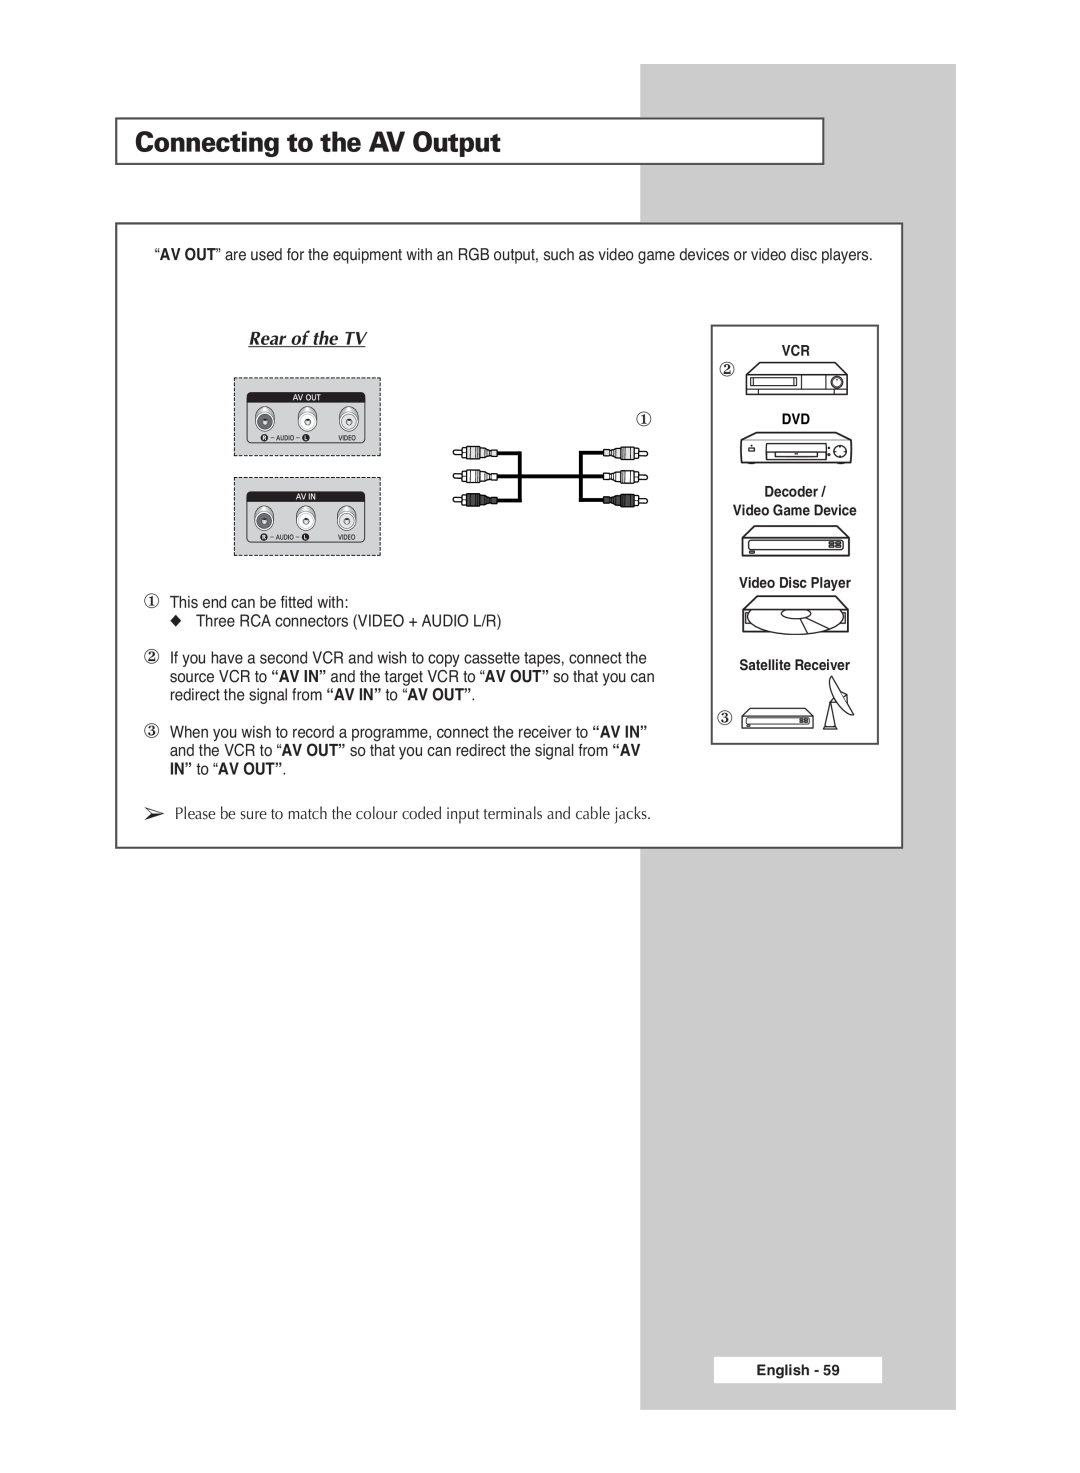 Samsung PS-42S5S manual Connecting to the AV Output, Rear of the TV 